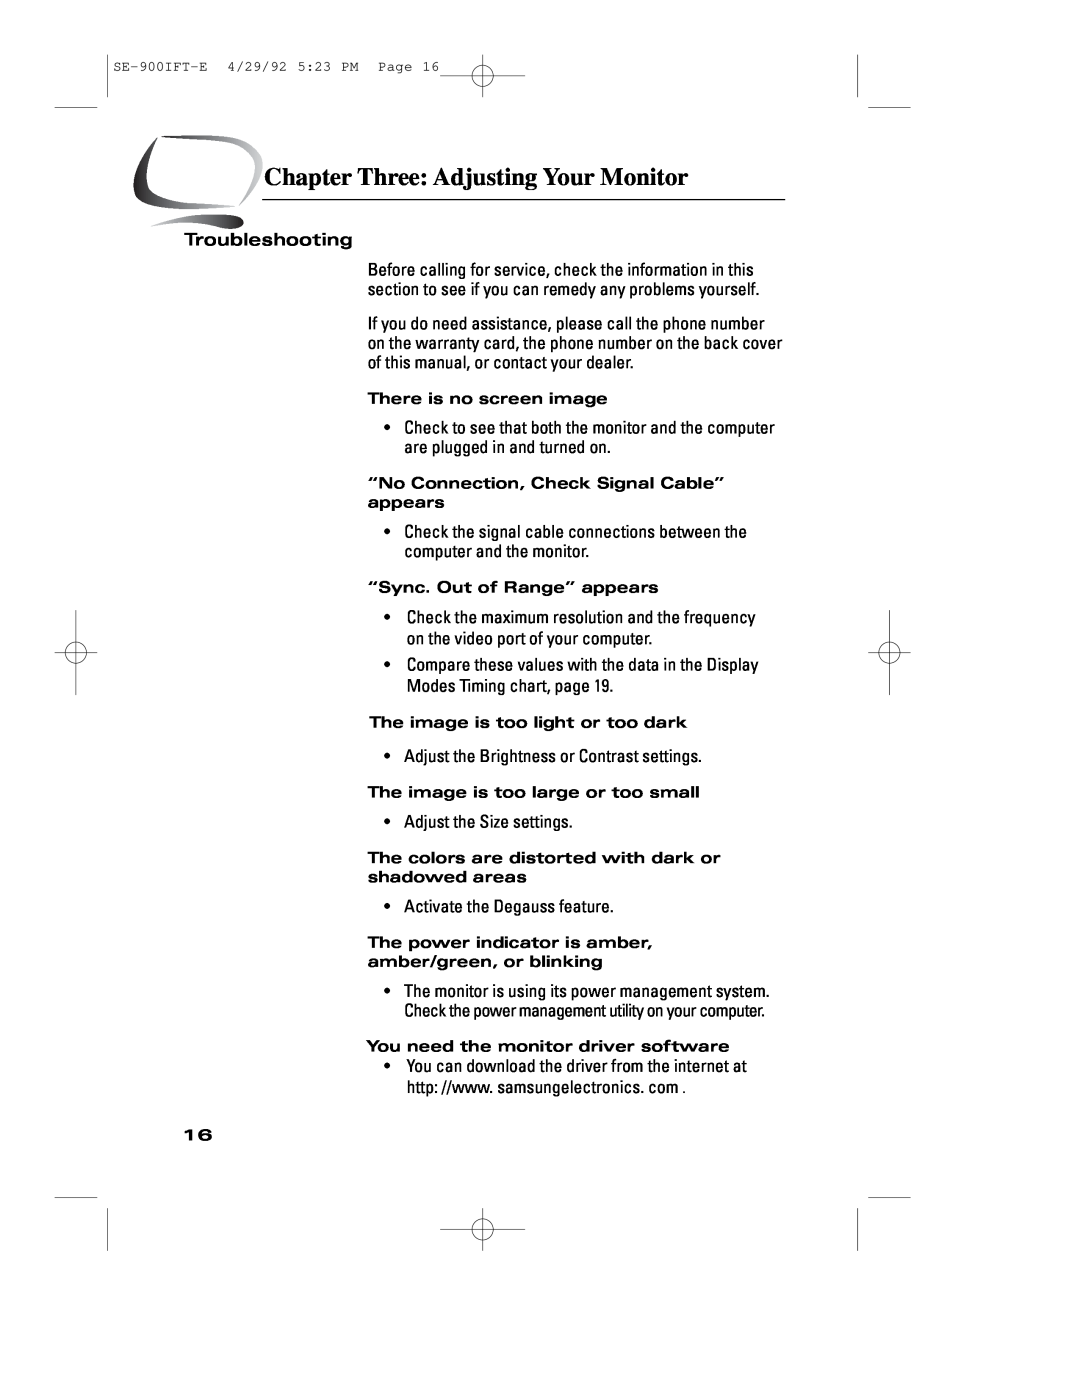 Samsung 900IFT manual Troubleshooting, Chapter Three Adjusting Your Monitor 